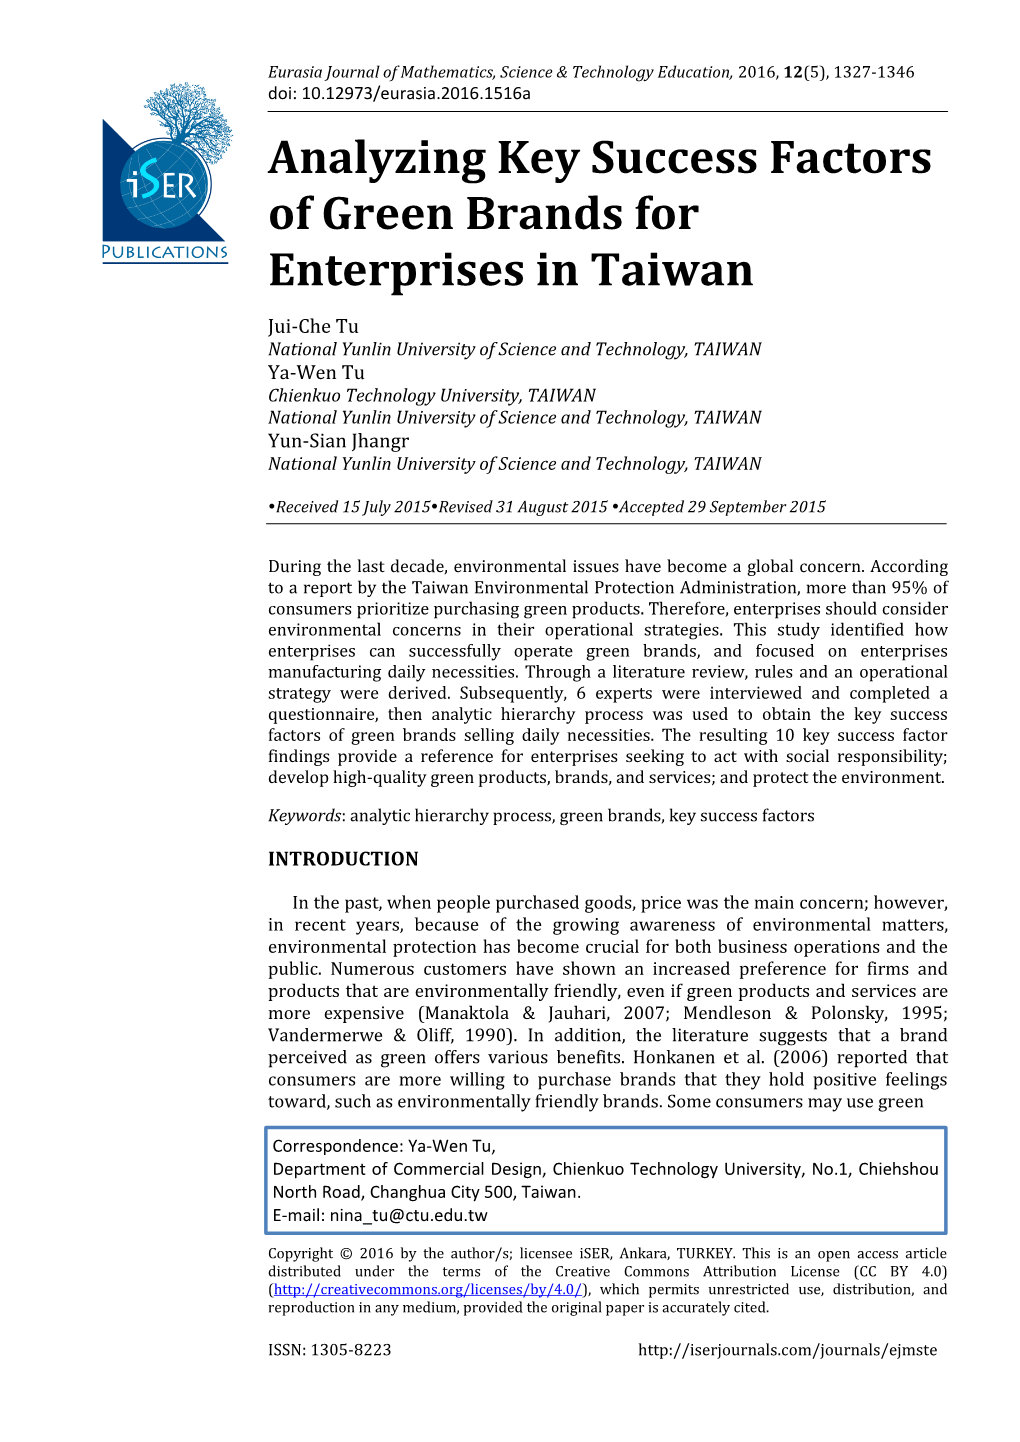 Analyzing Key Success Factors of Green Brands for Enterprises in Taiwan